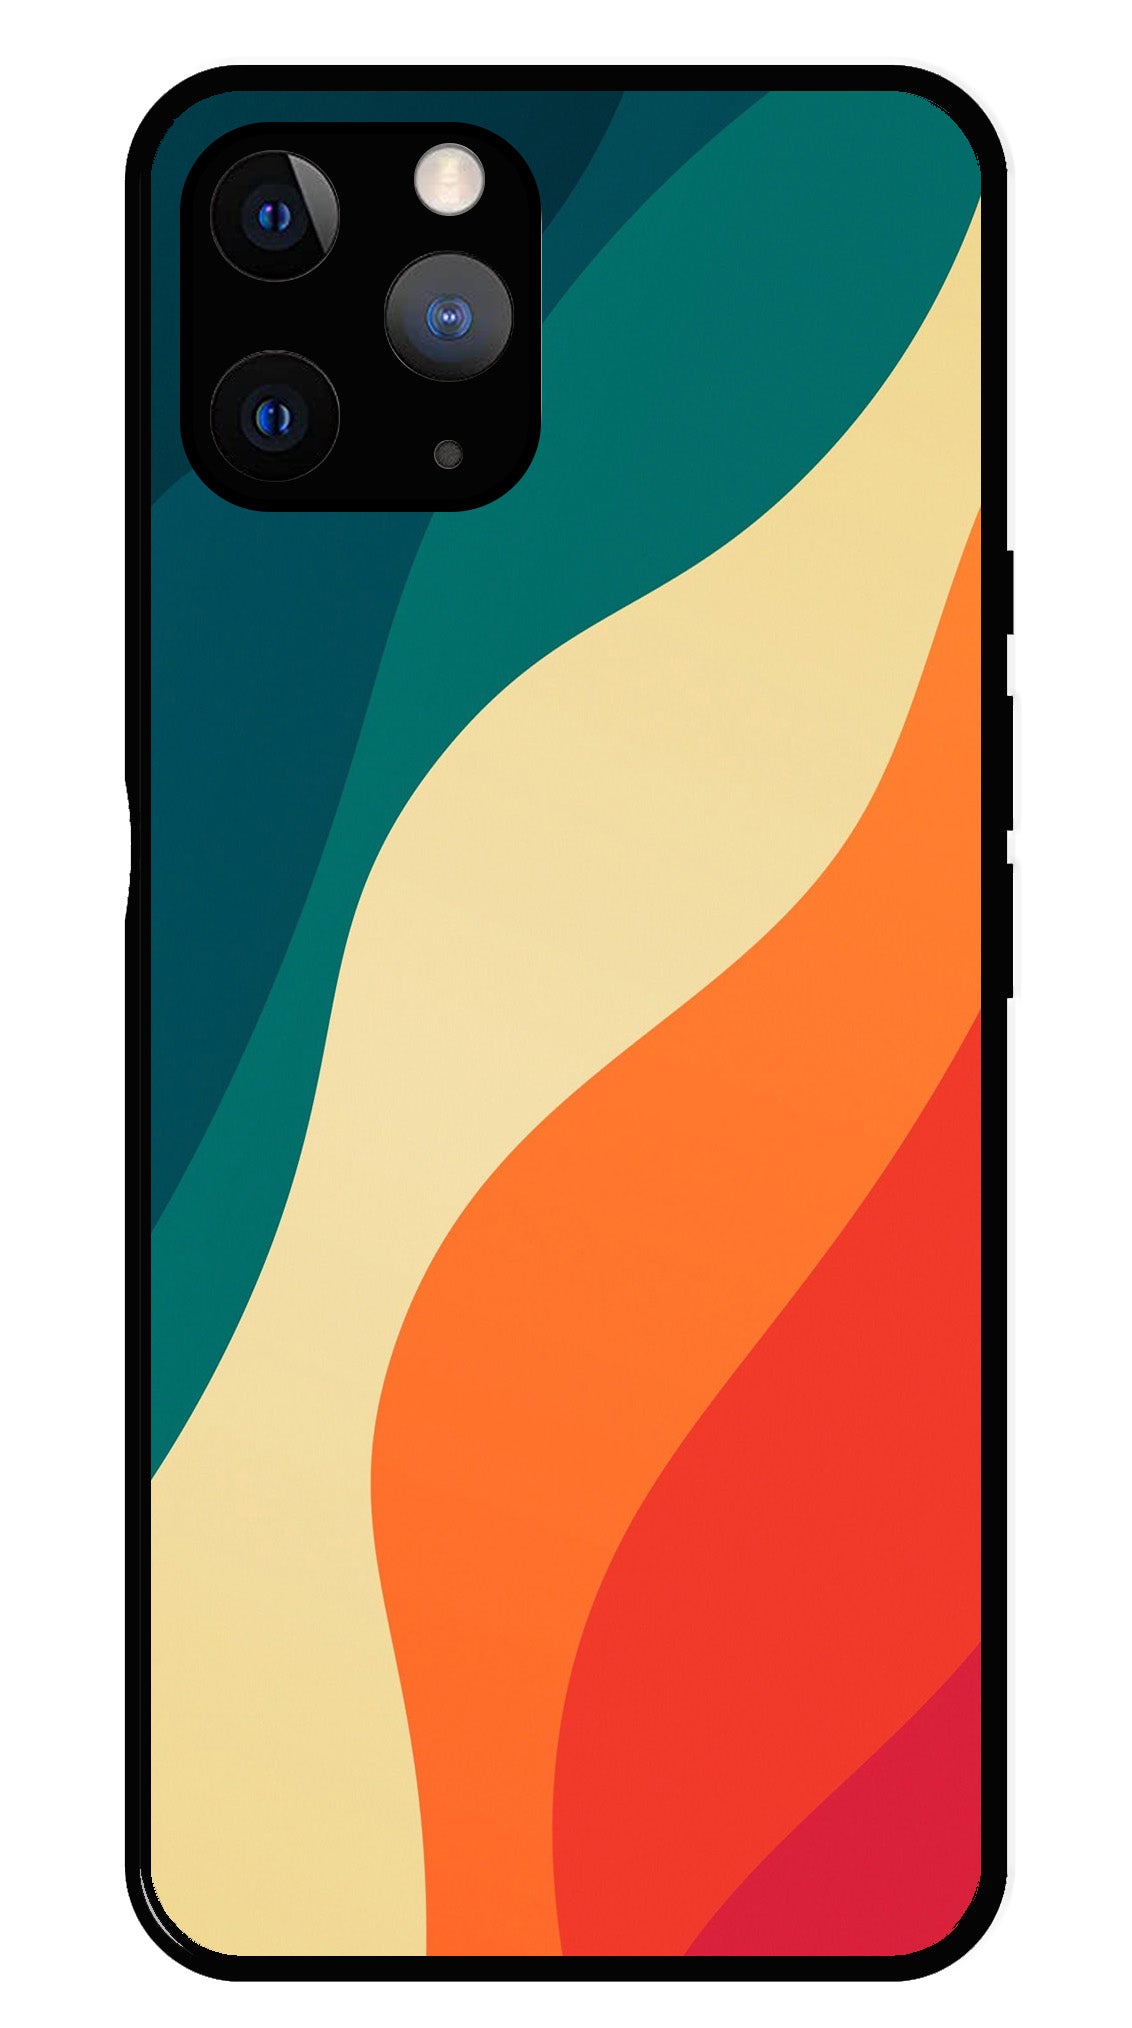 Muted Rainbow Metal Mobile Case for iPhone 11 Pro Max